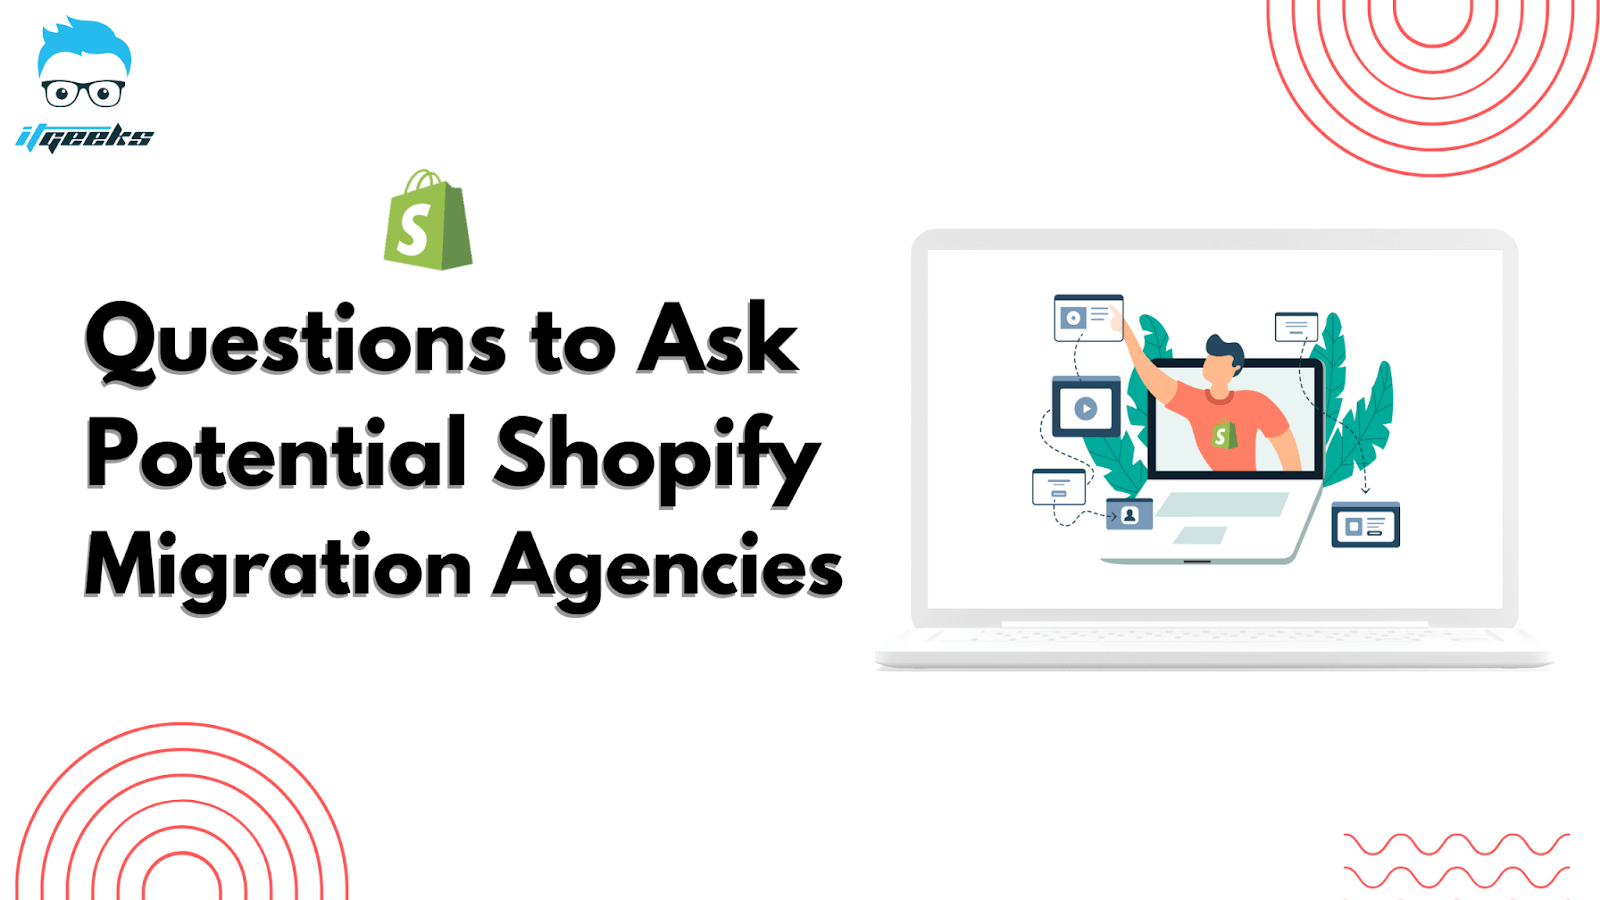 Questions to Ask Potential Shopify Migration Agencies